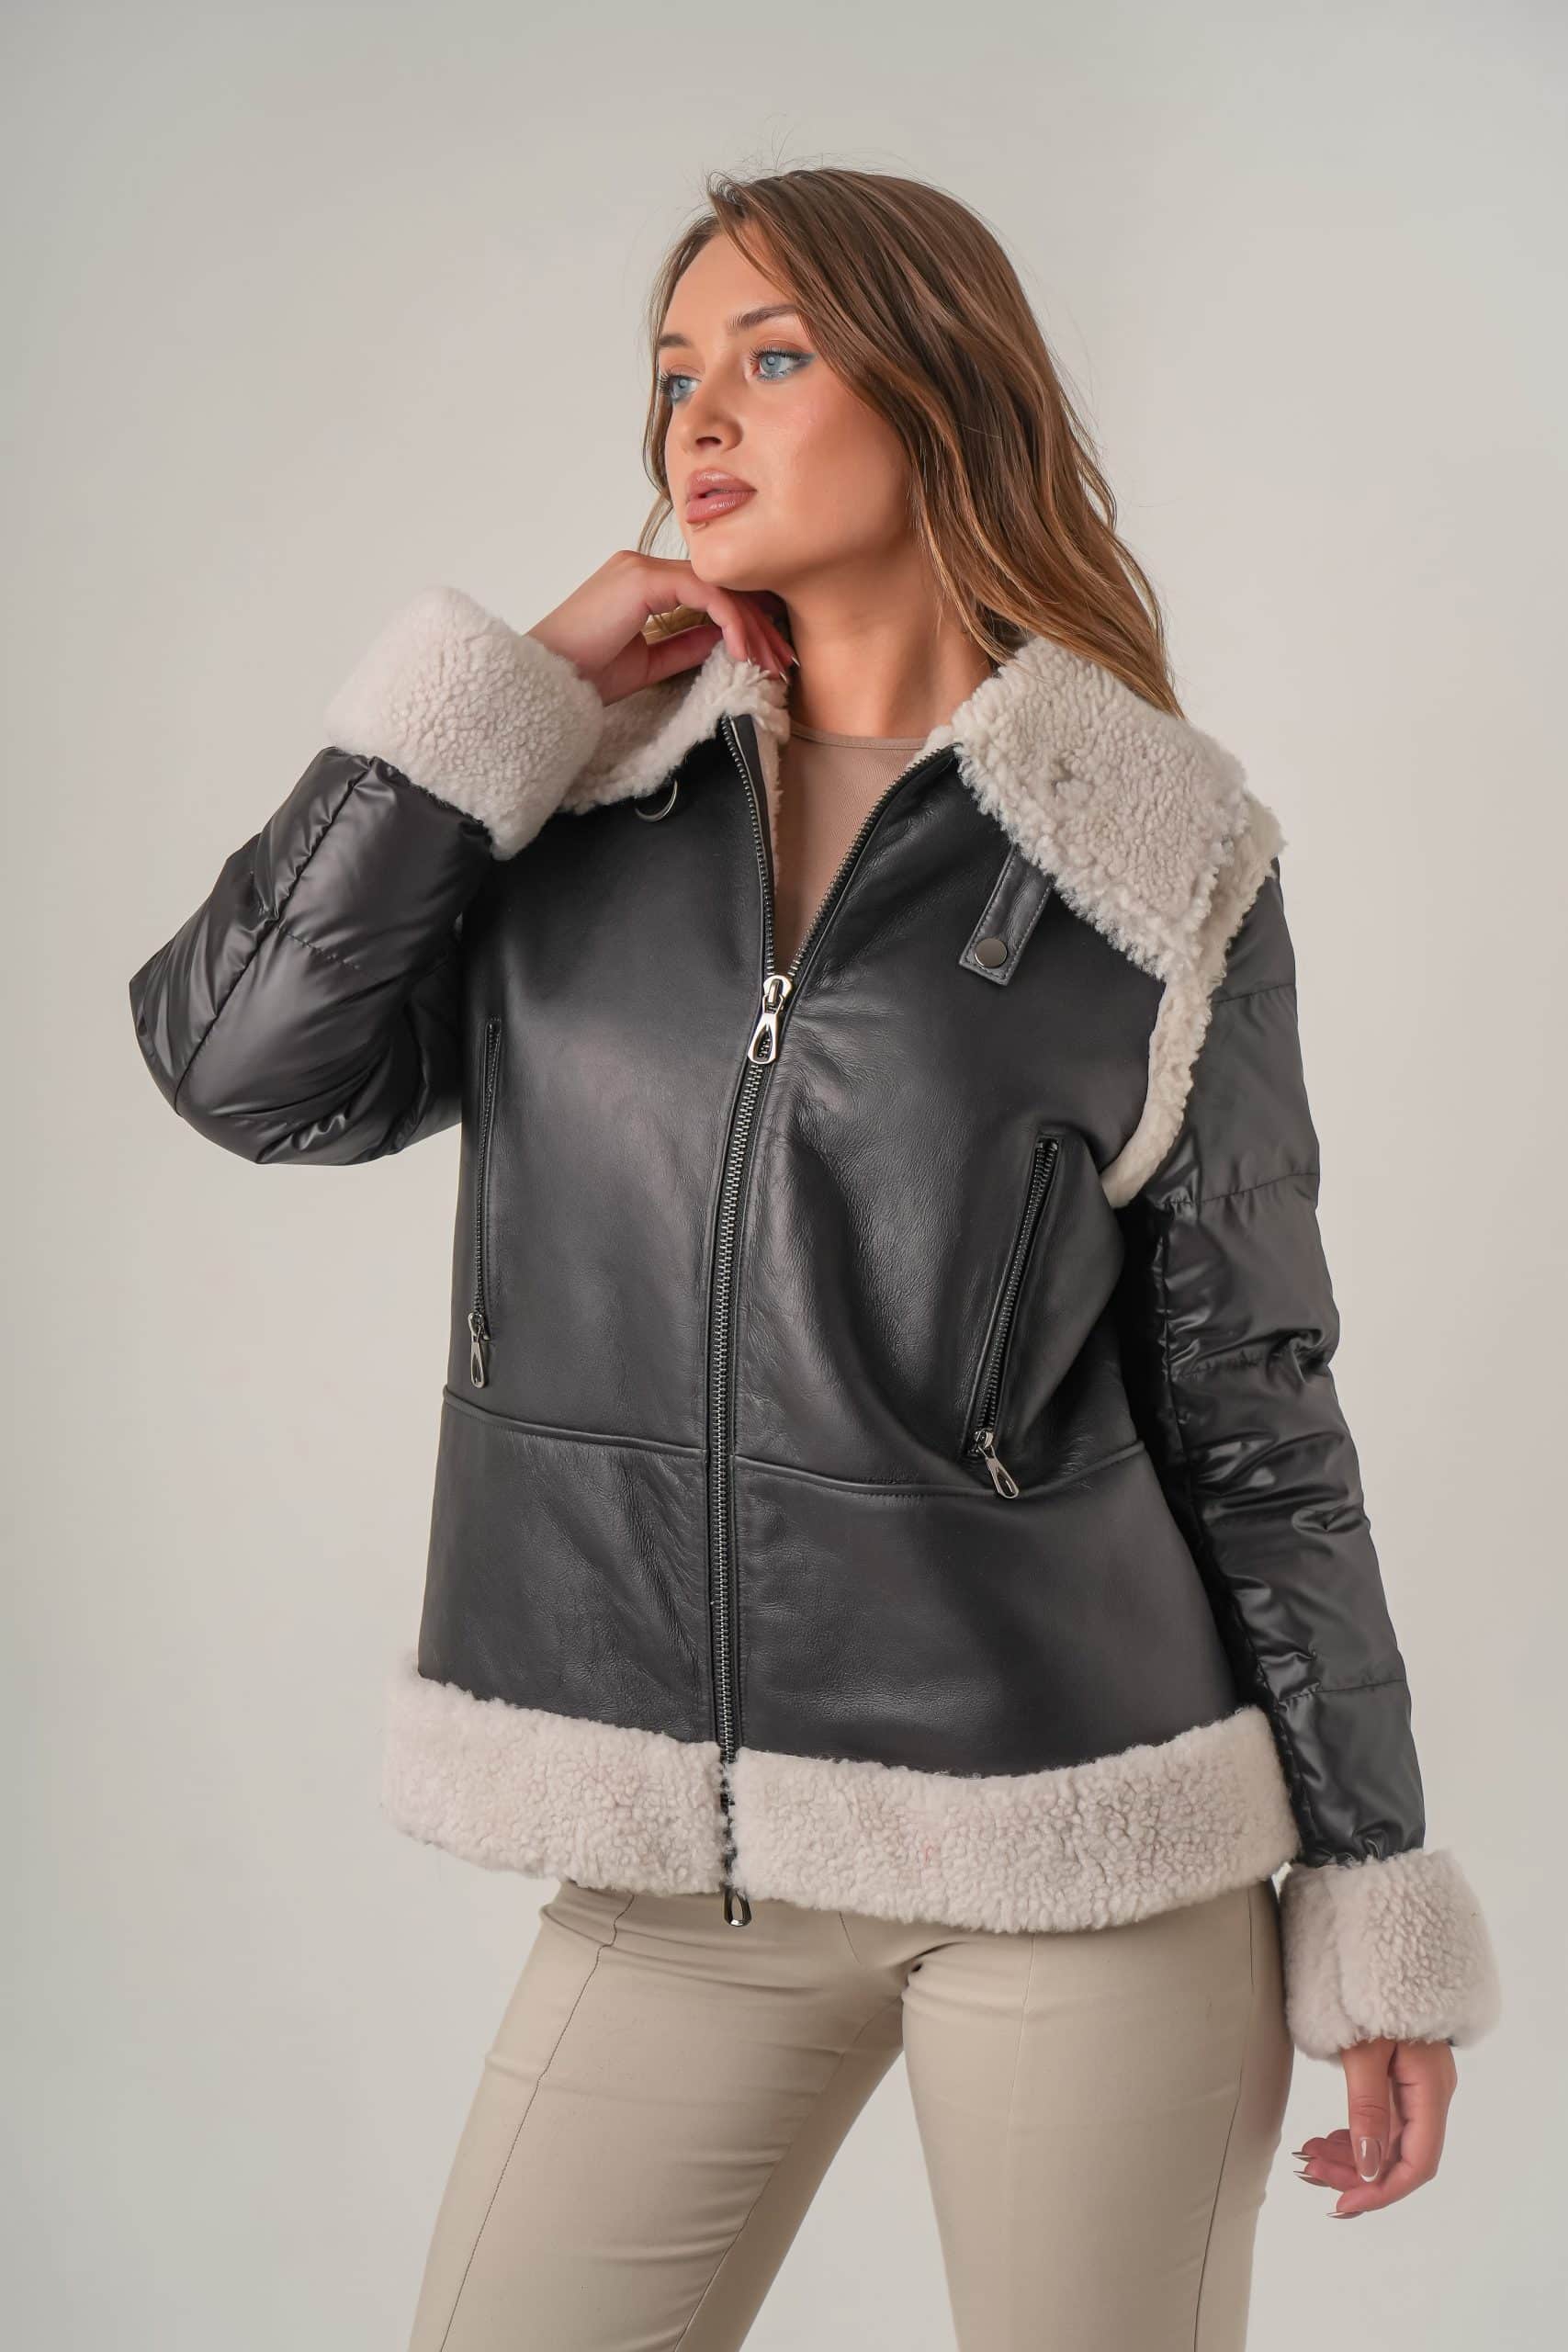 KB-982 Black-White Wool Curly With Fabric Shearling